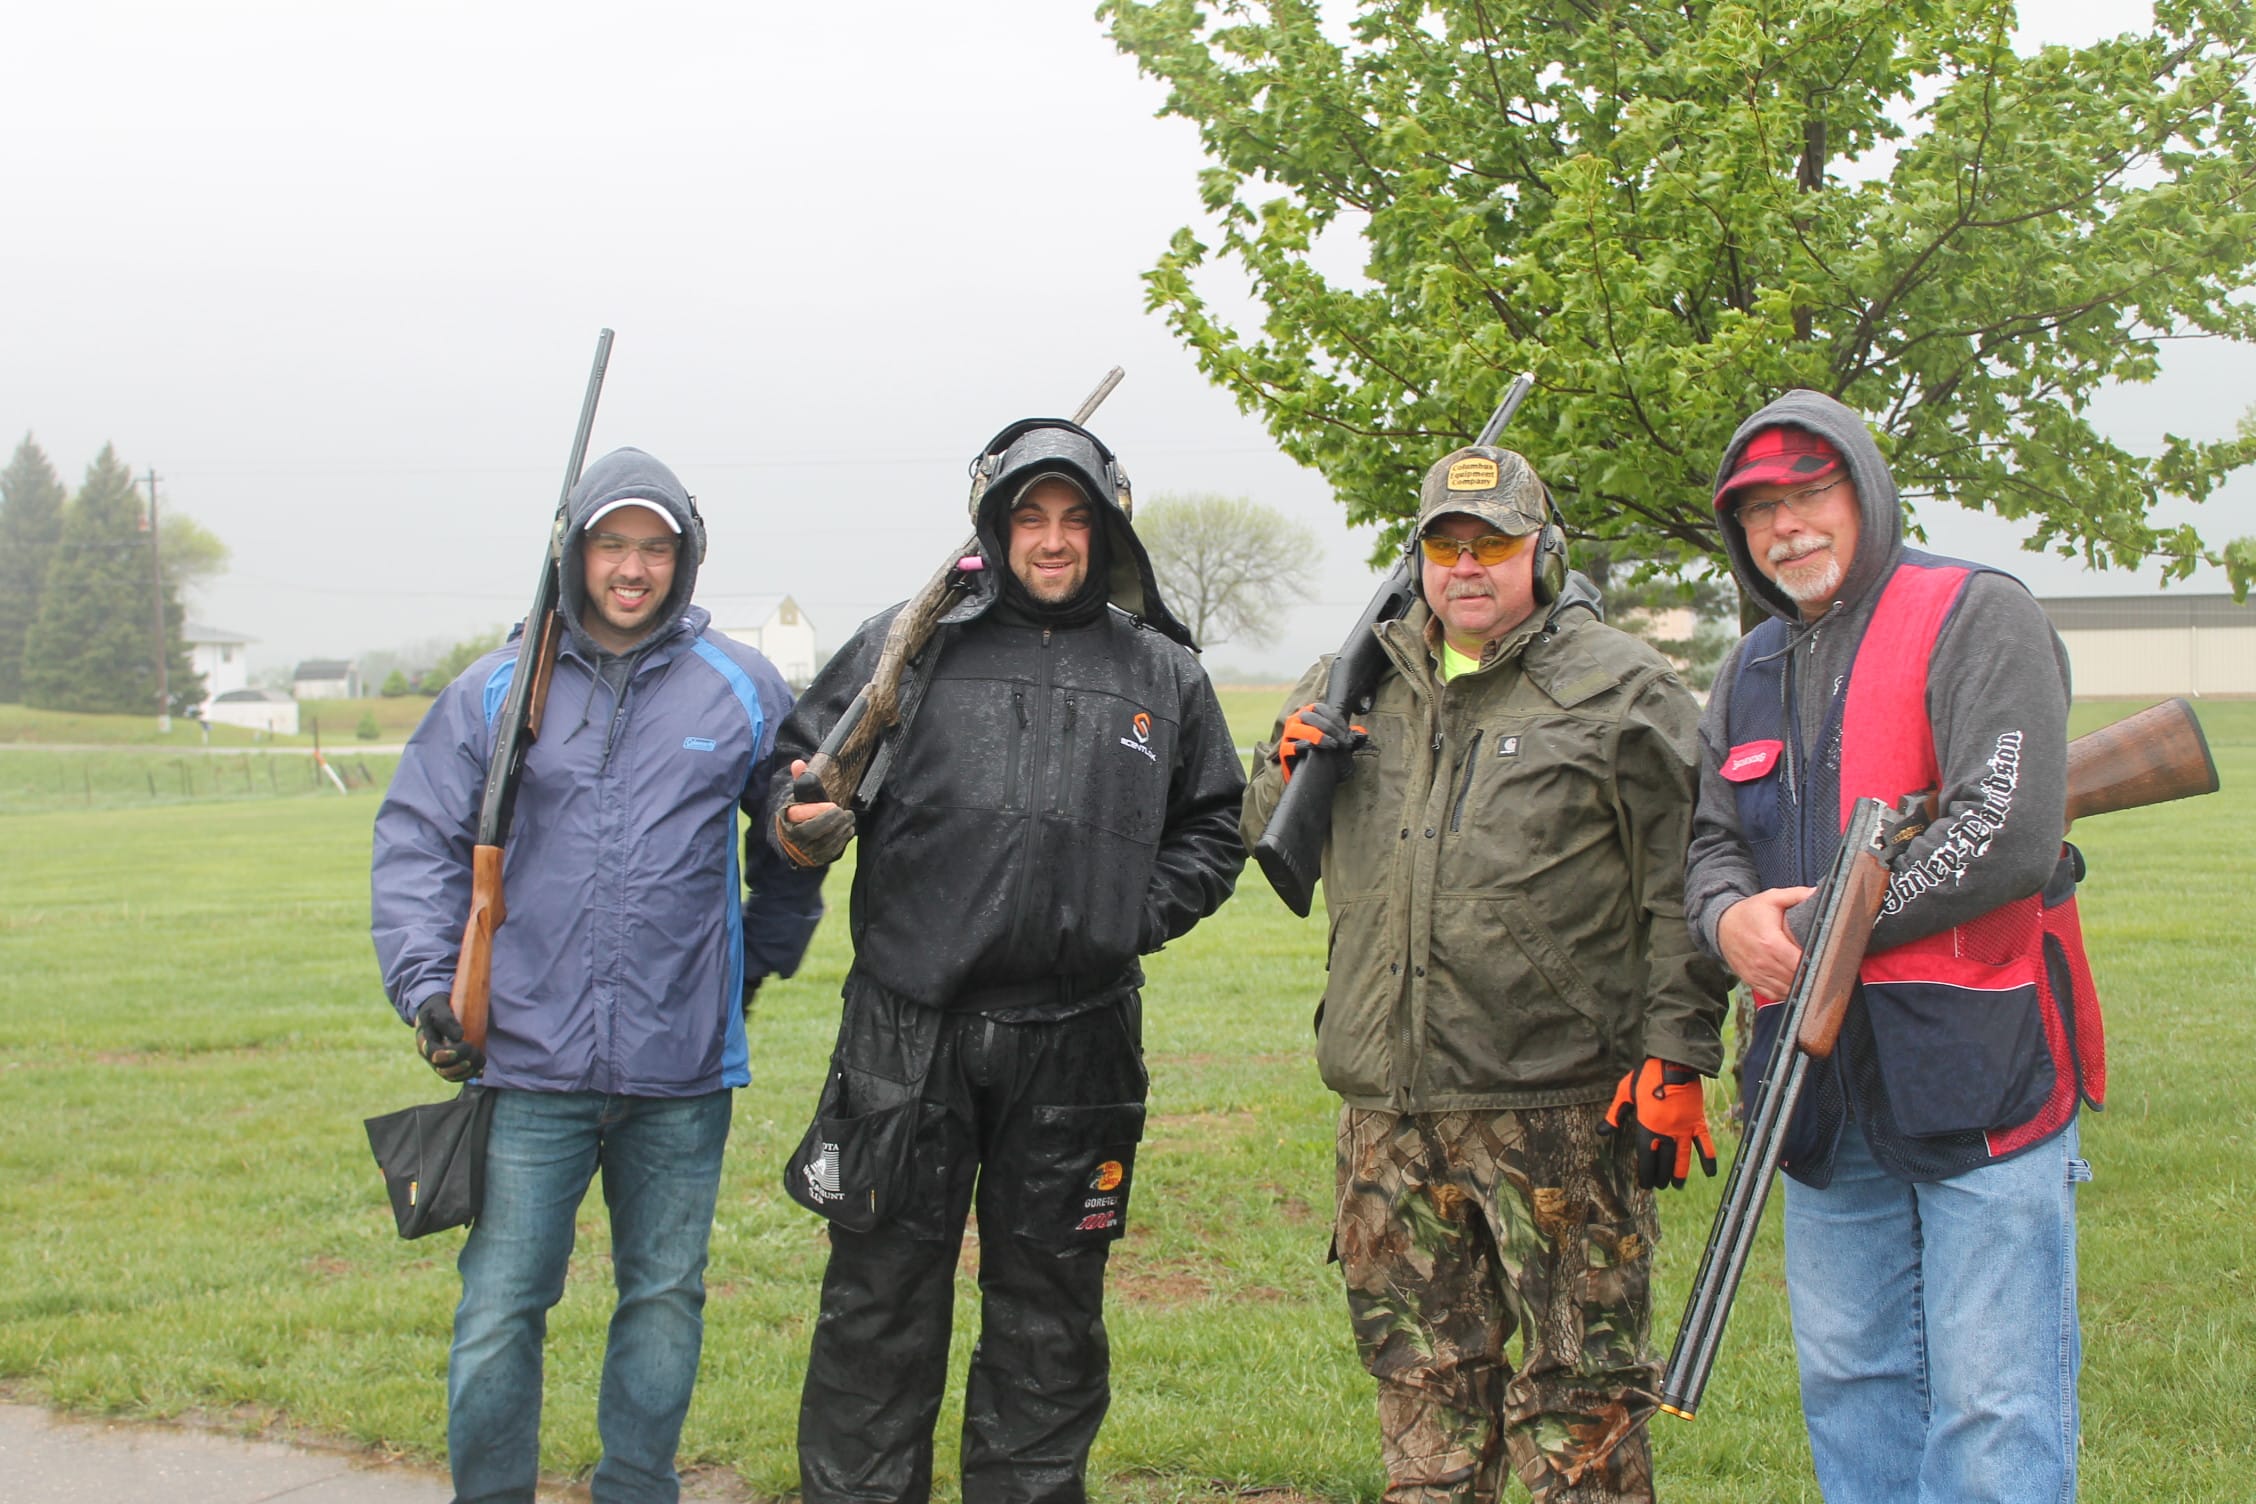 CSE Sponsors Team for 5th Annual Shoot for the Cure